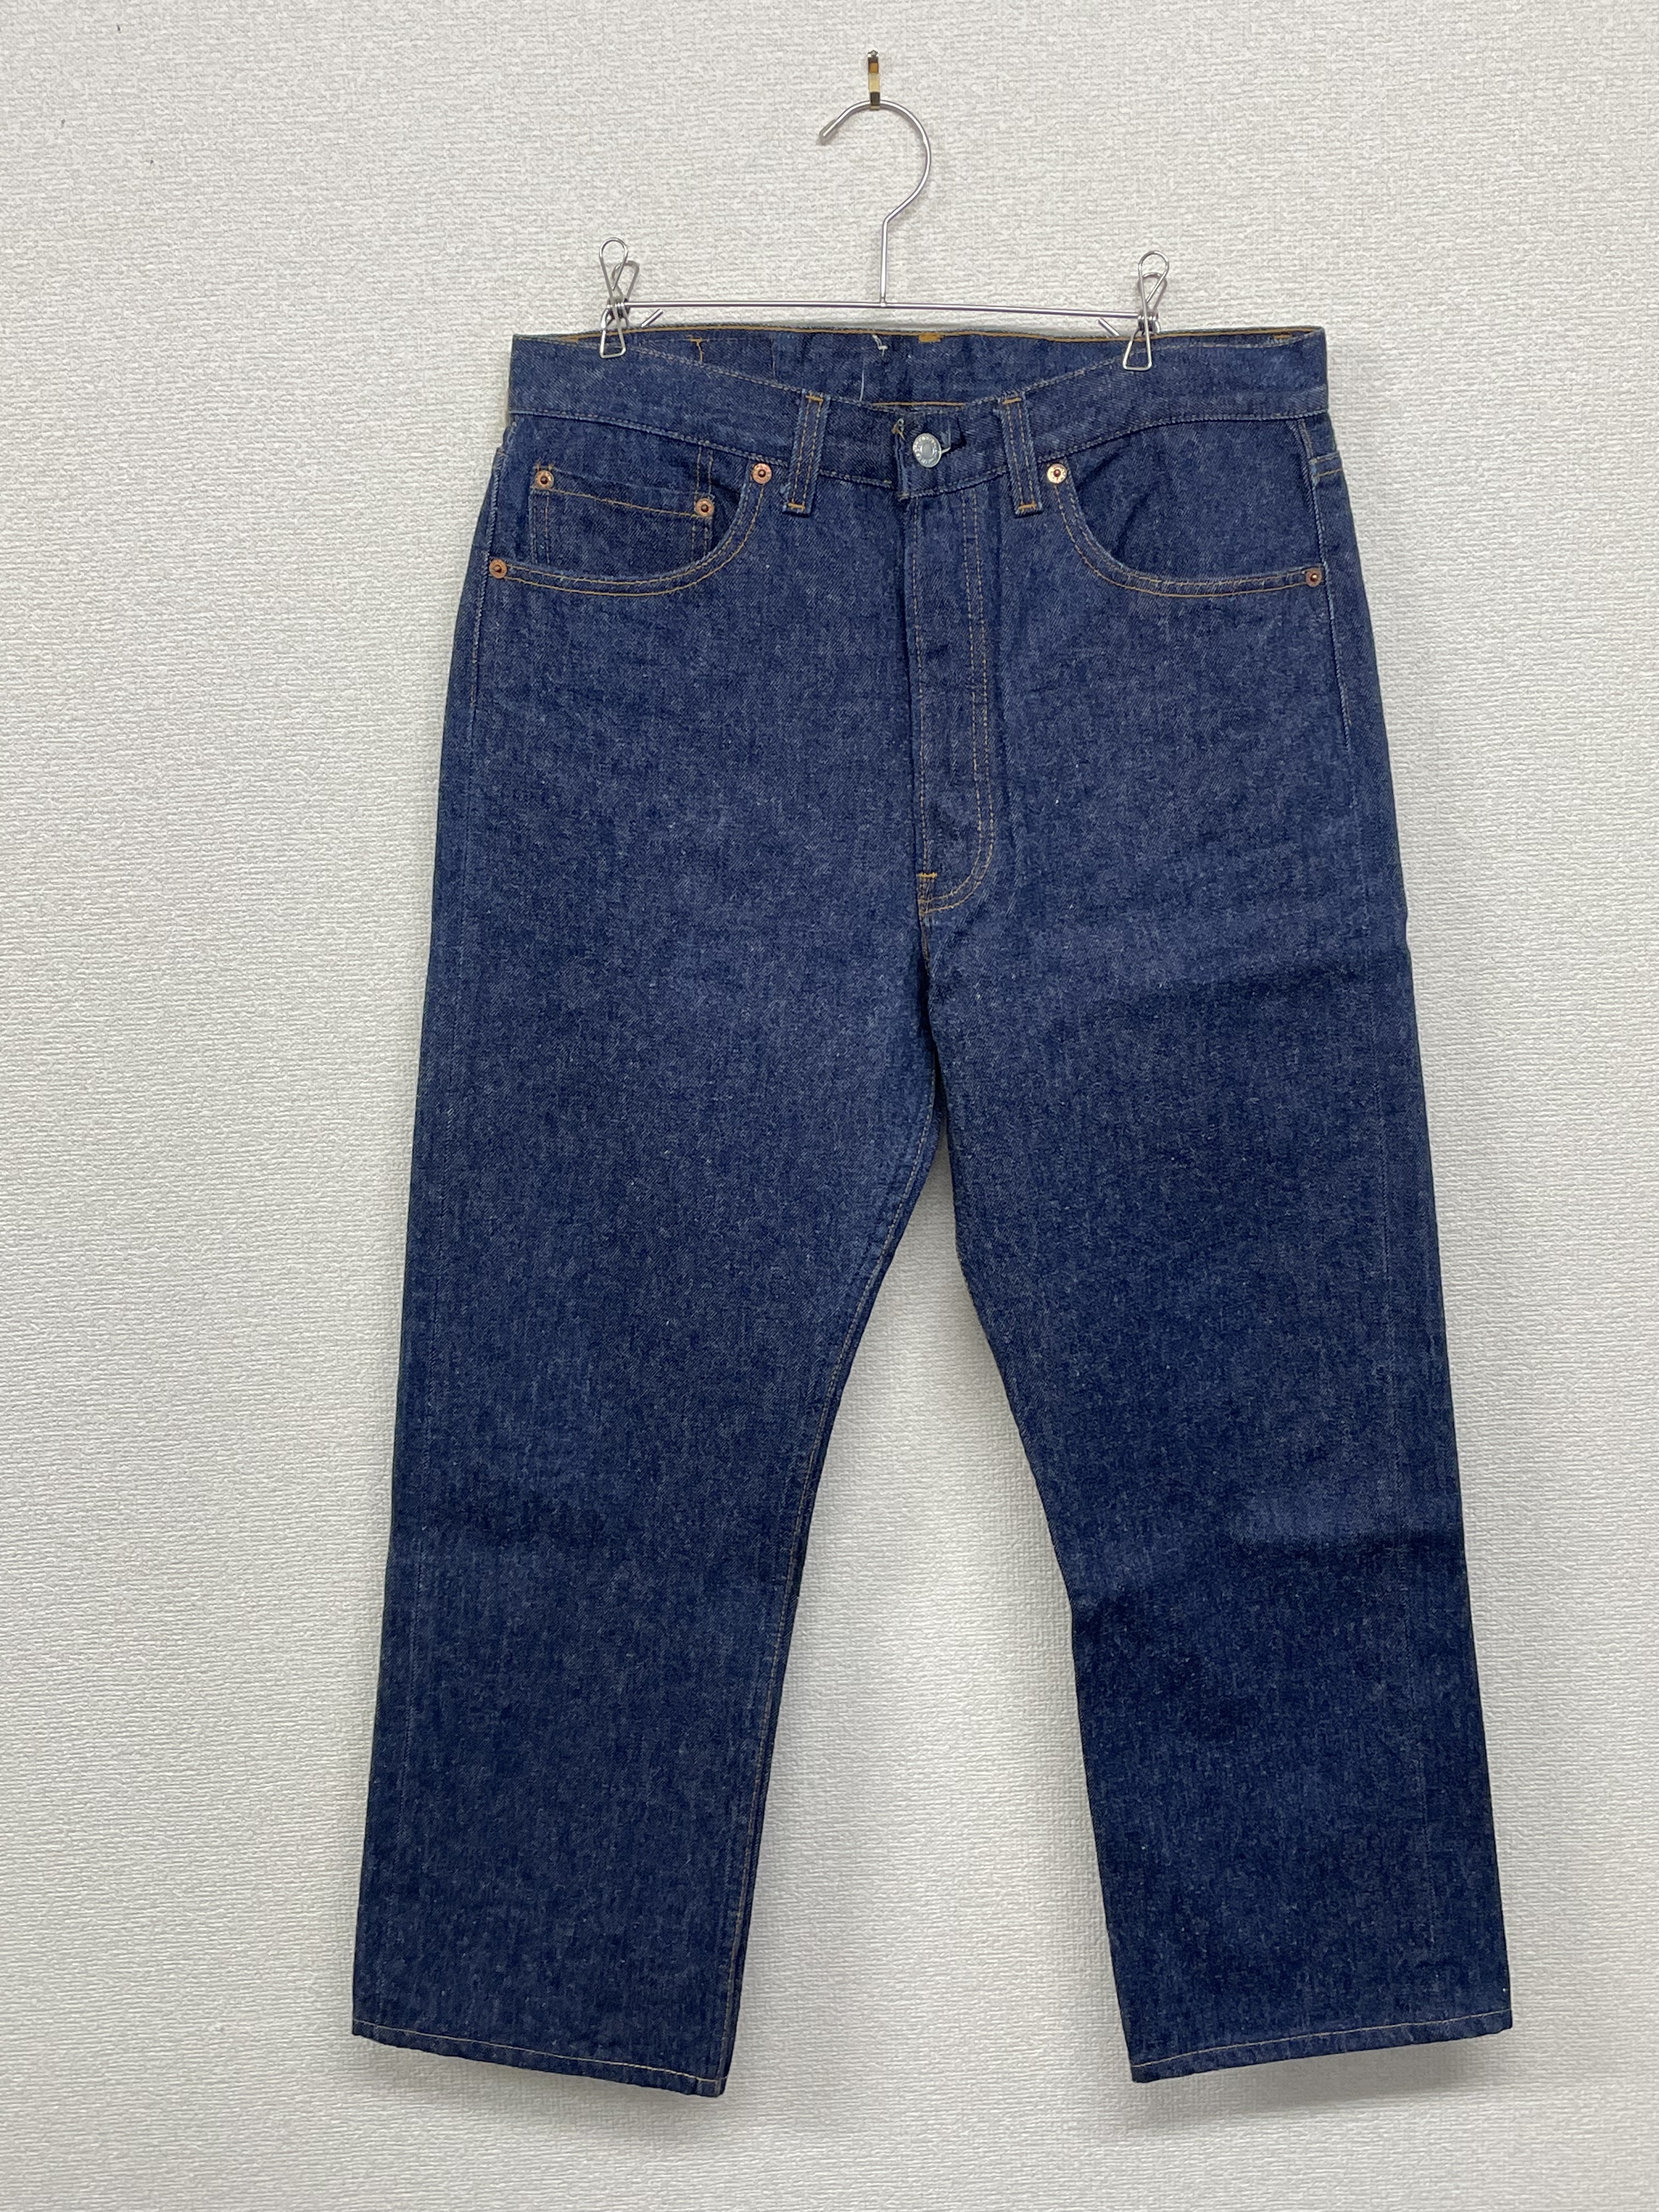 80's 1988 米国製 MADE IN USA リーバイス 552工場 LEVI'S 501 裾 ...